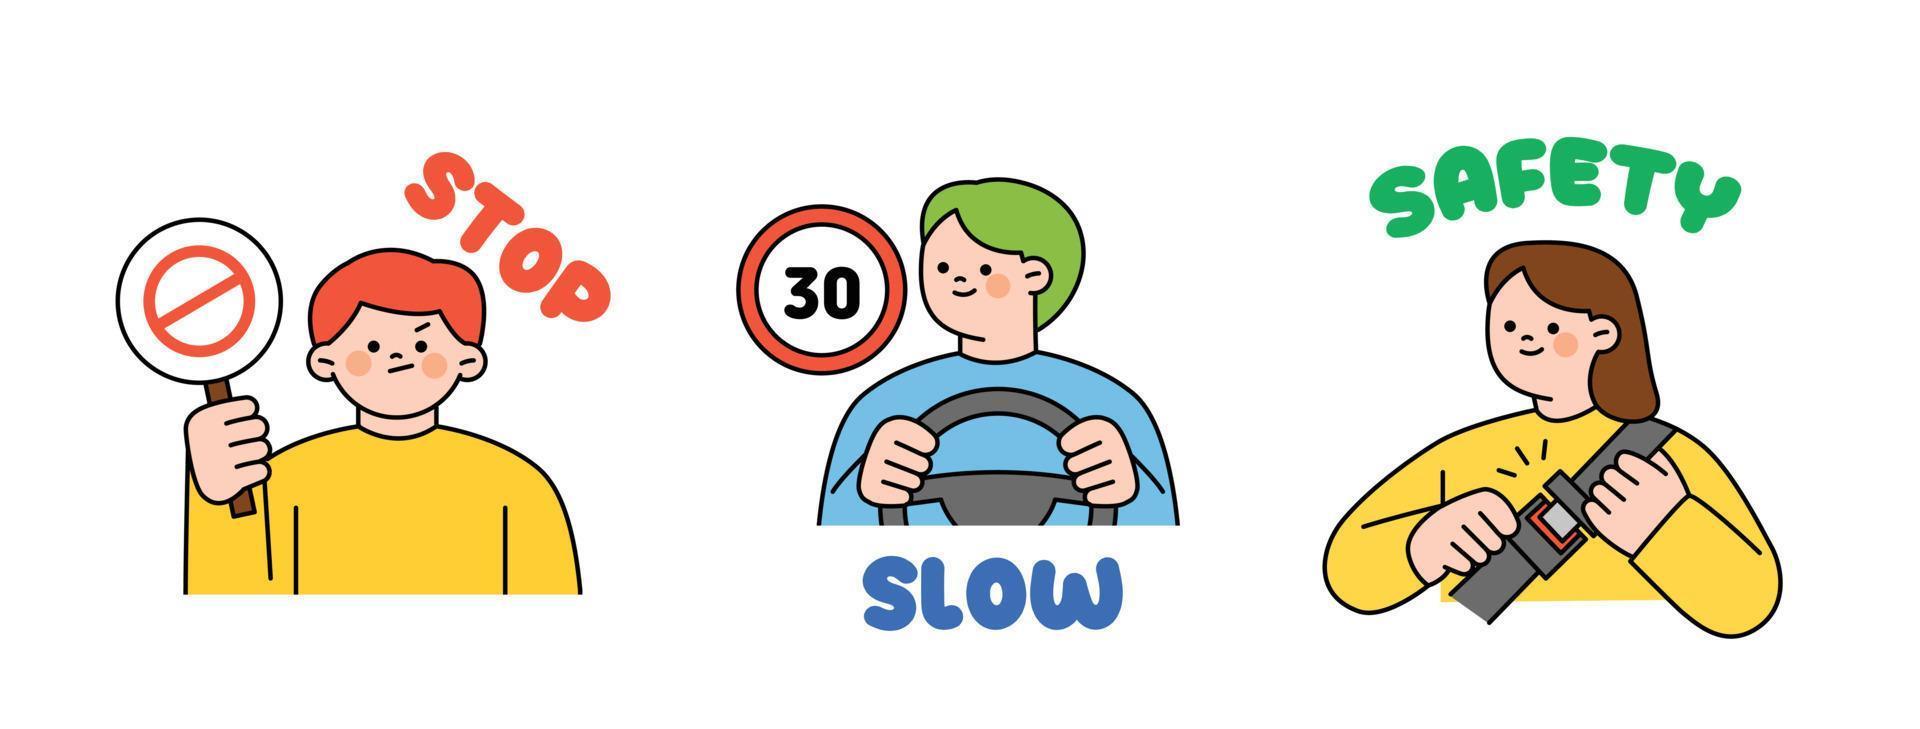 Traffic safety manual for drivers. Person holding a stop sign. Man driving and speed sign. A person wearing a seat belt. vector